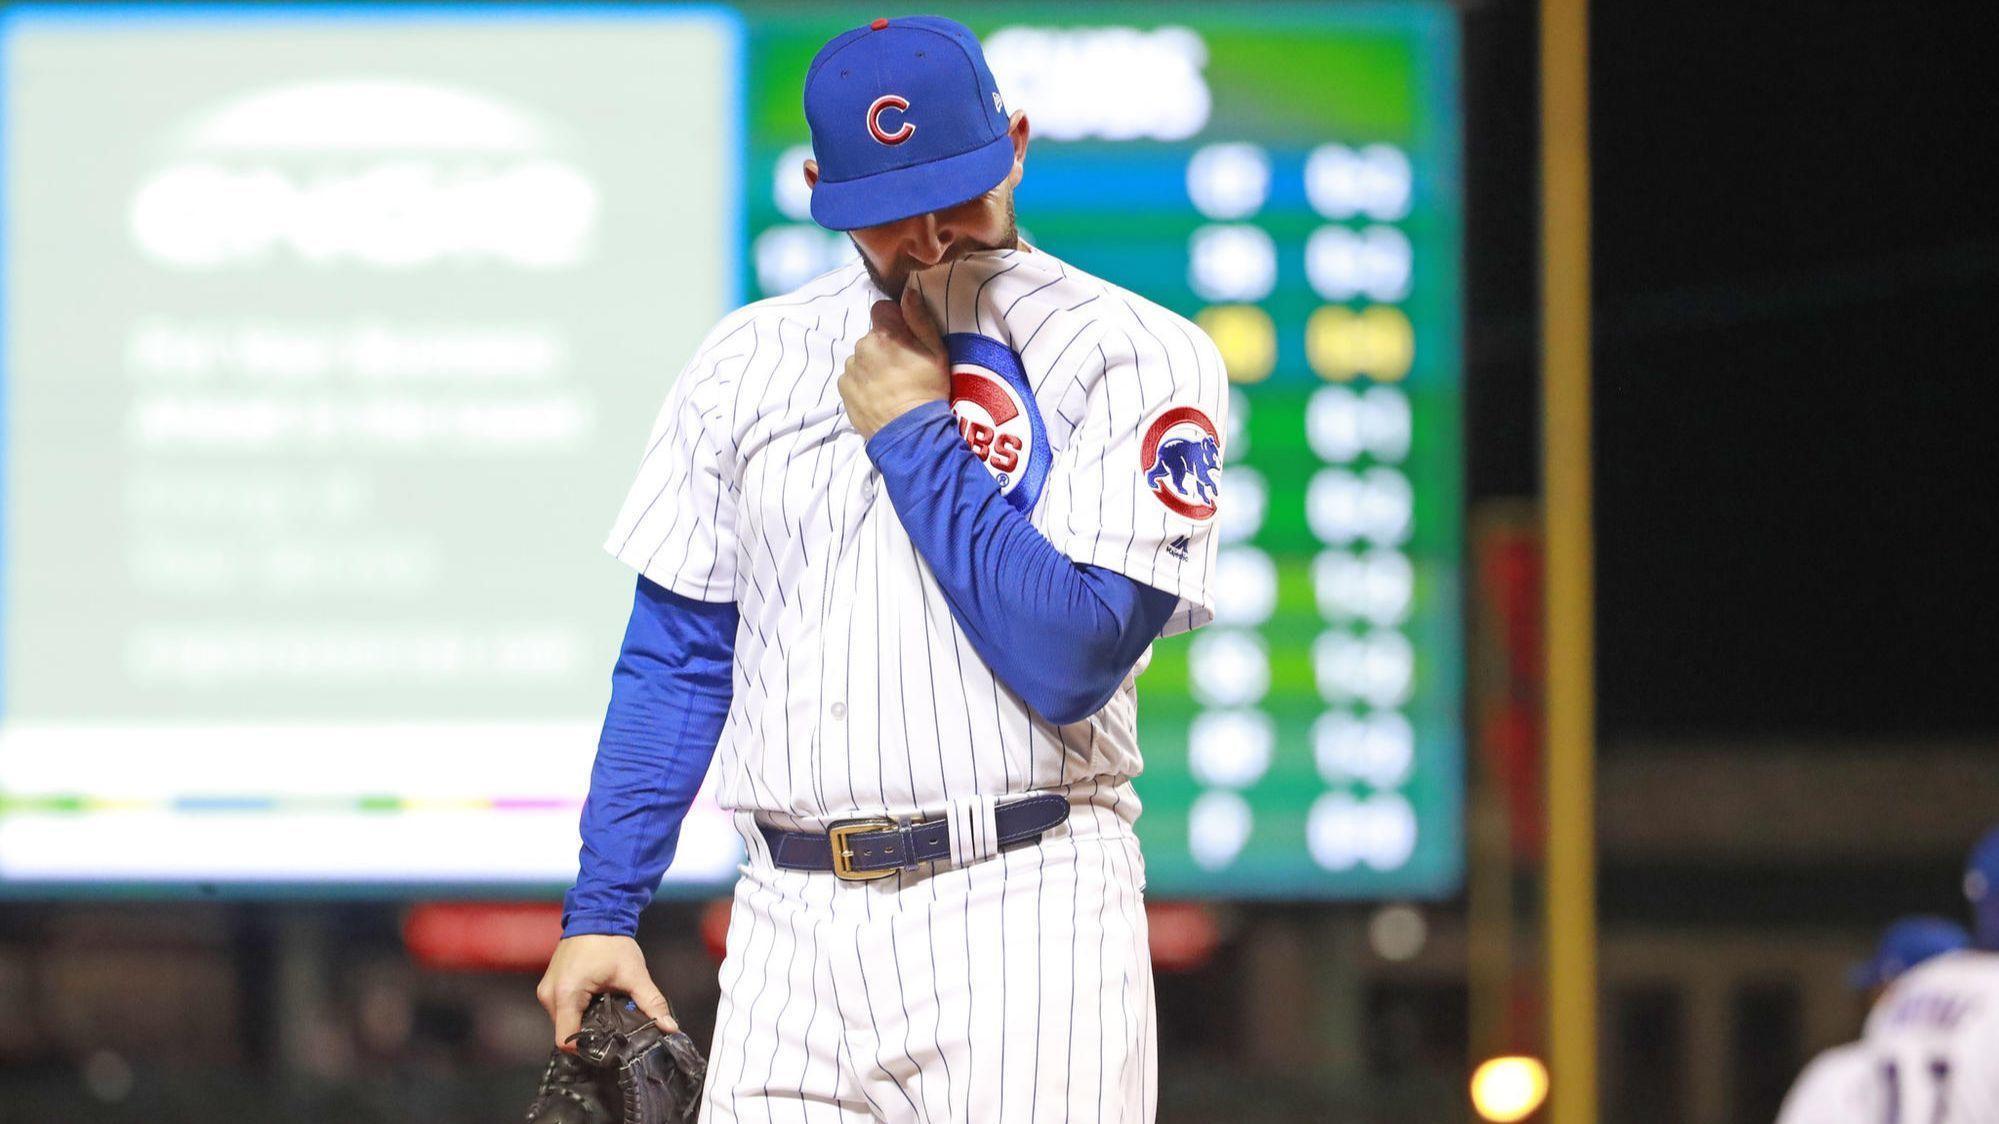 Cubs' choppy start to season continues with 5-3 loss to Cardinals